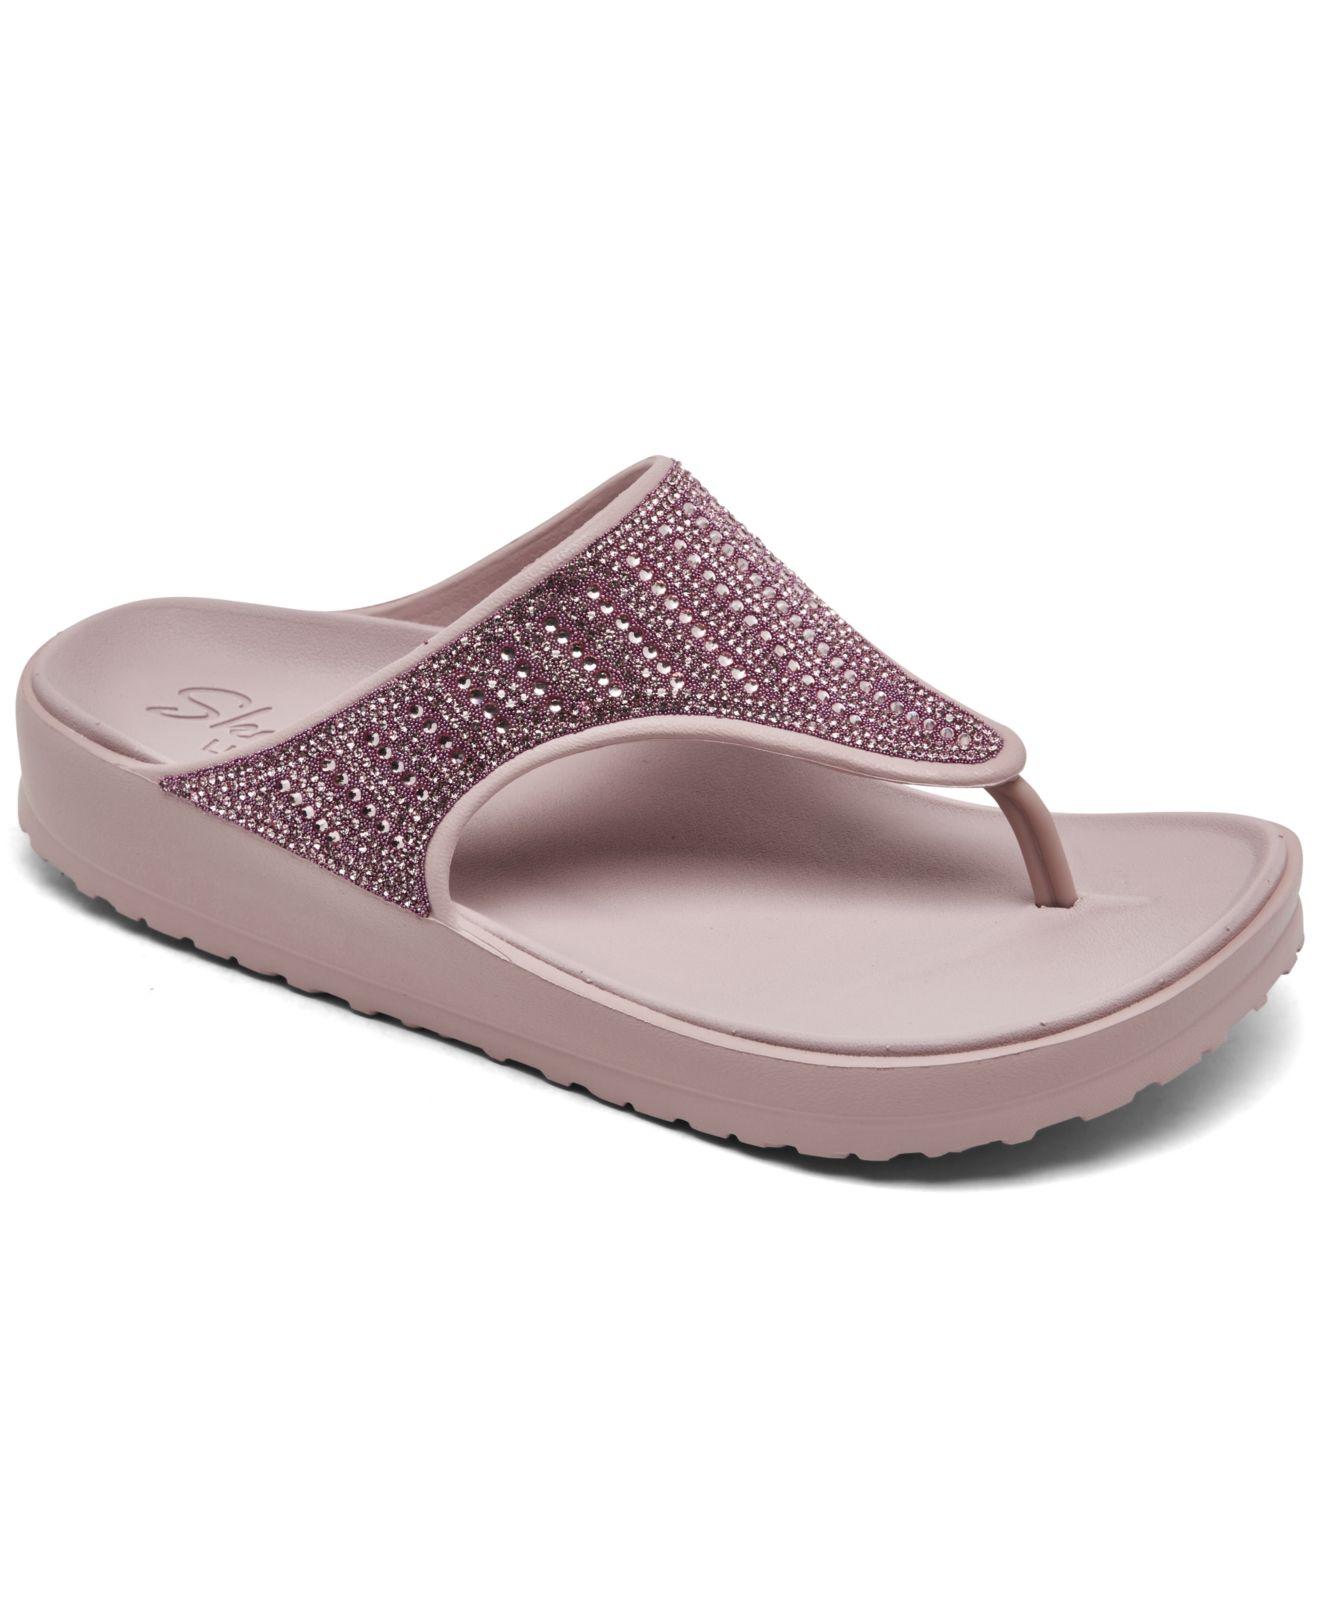 Skechers Foamies- Cali Breeze 2.0 - Glimmer Love Flip-flop Thong Sandals  From Finish Line in Pink | Lyst